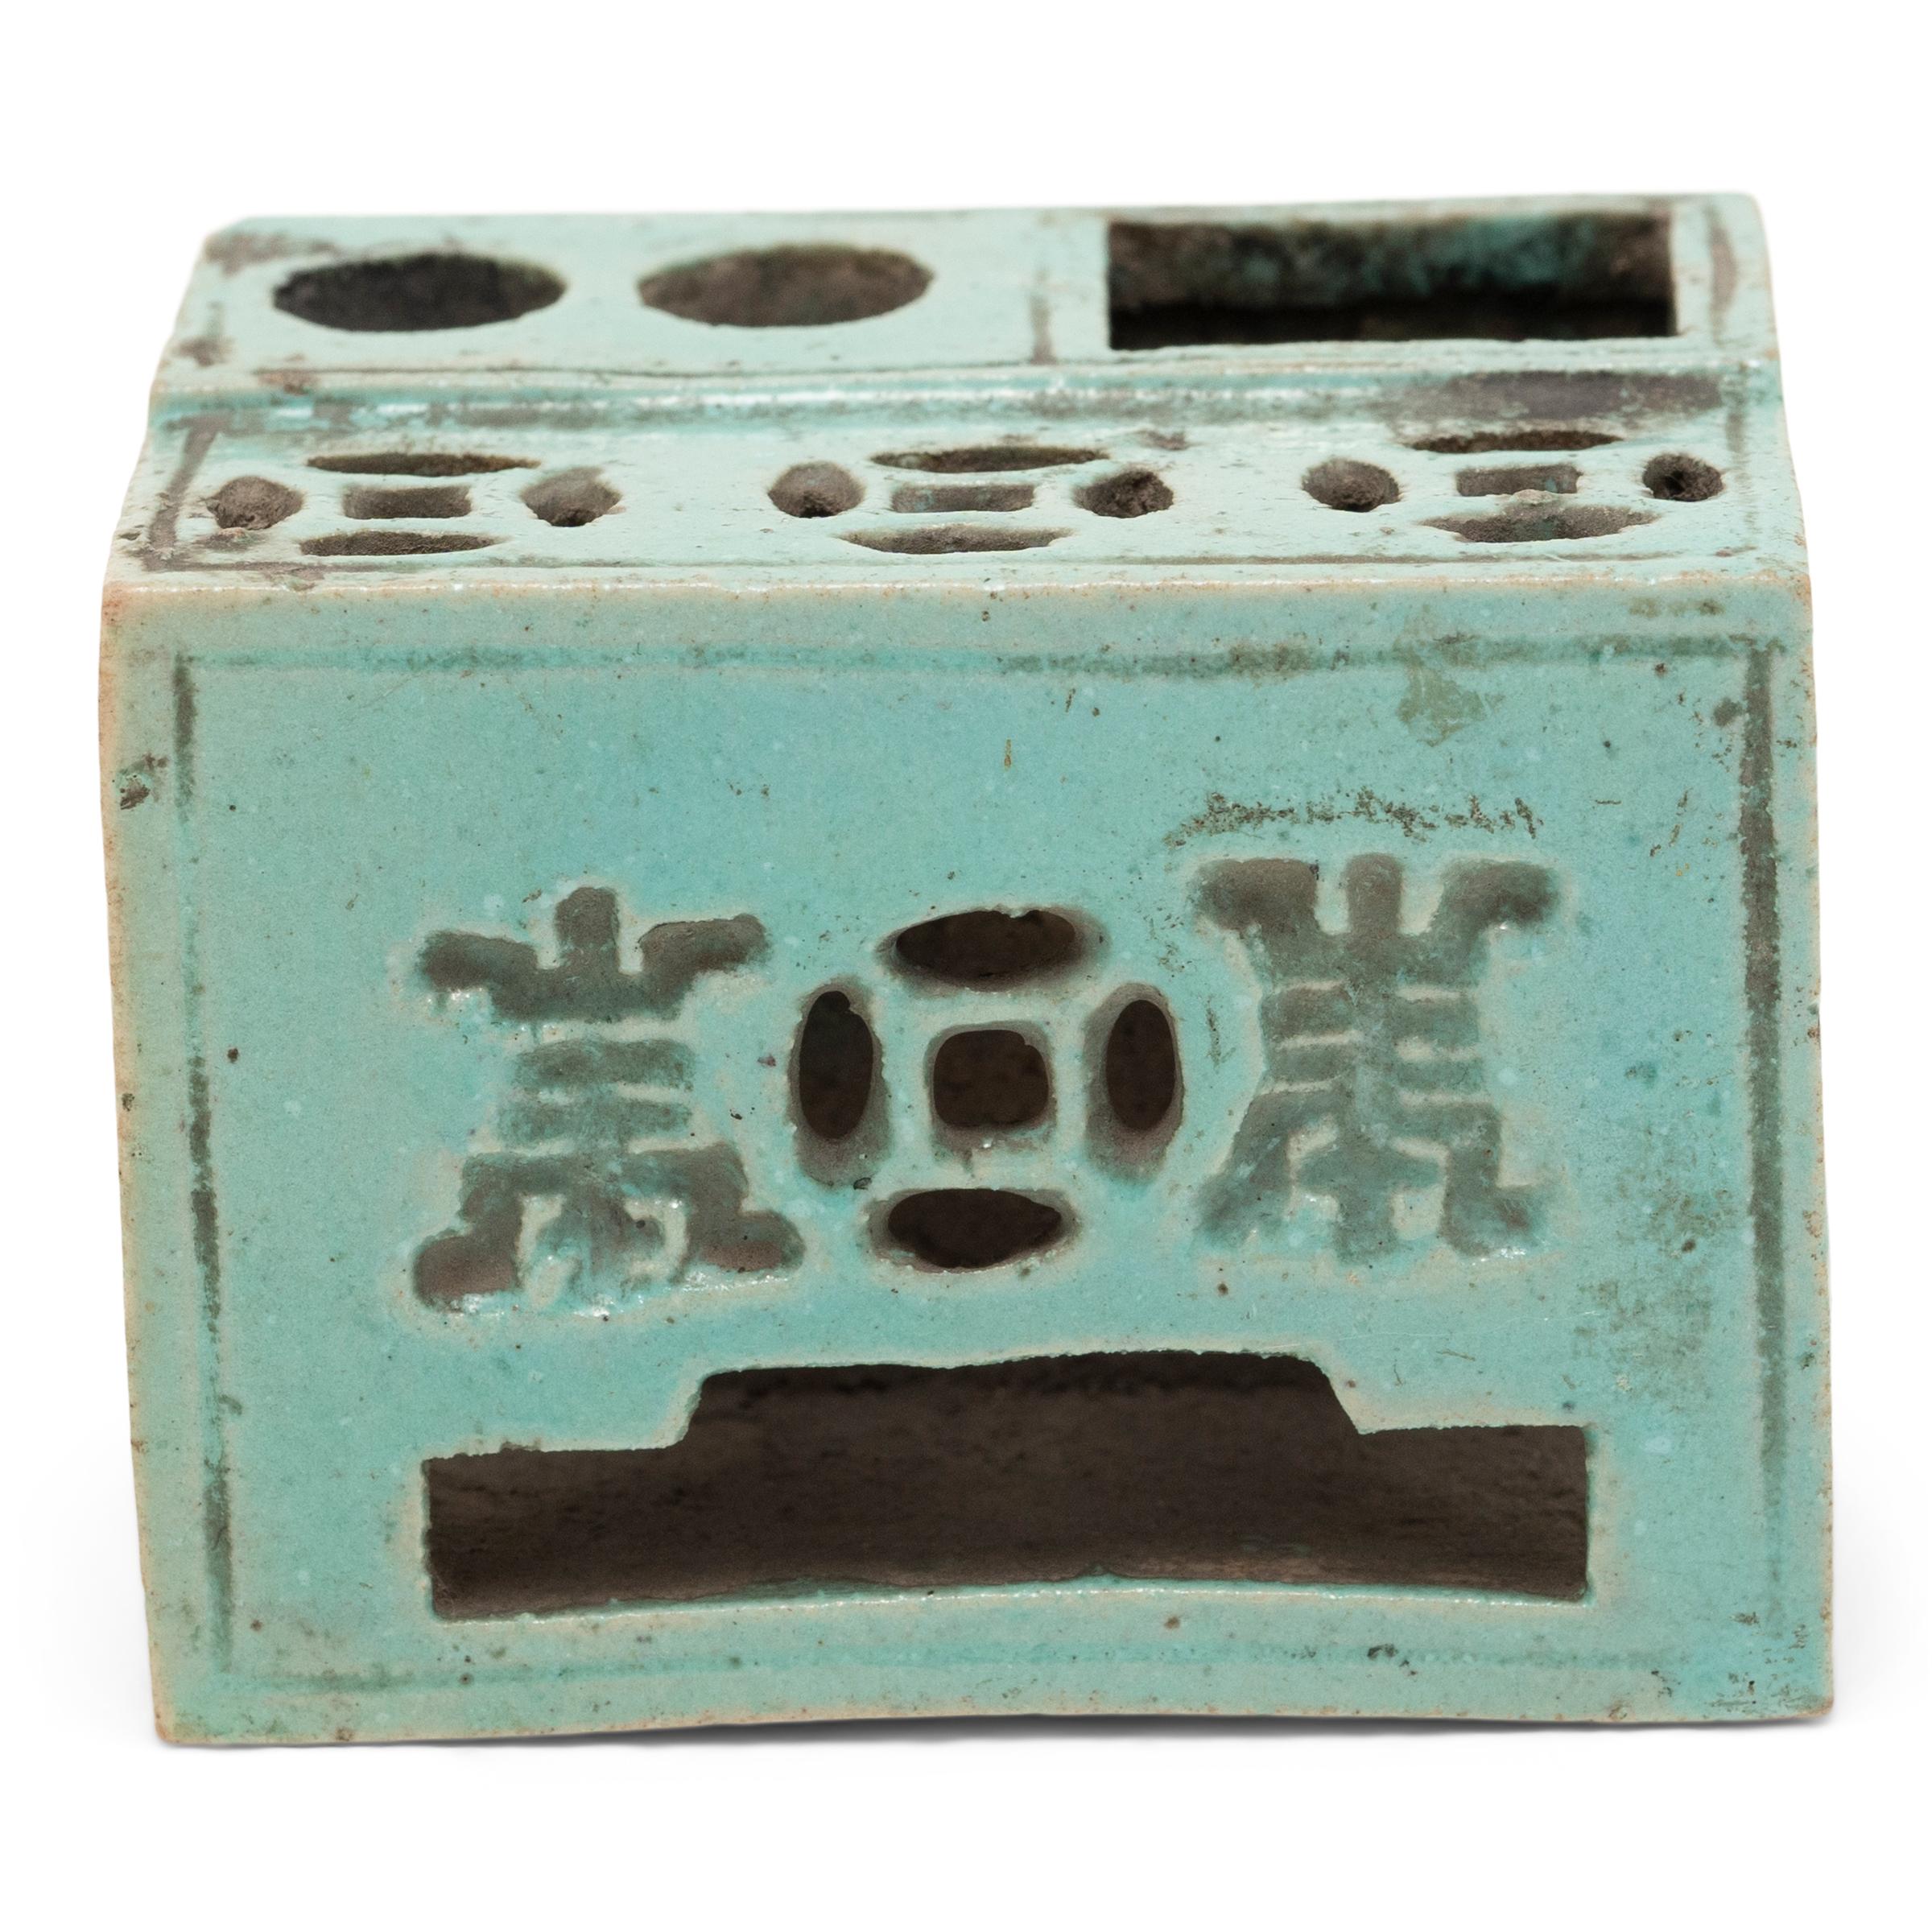 Set alongside the four treasures of the study - the calligraphy brush, ink, paper, and inkstone - a brush rest was an essential fixture of the scholars' desk. This early 20th century ceramic brush rest is bathed in a speckled turquoise glaze